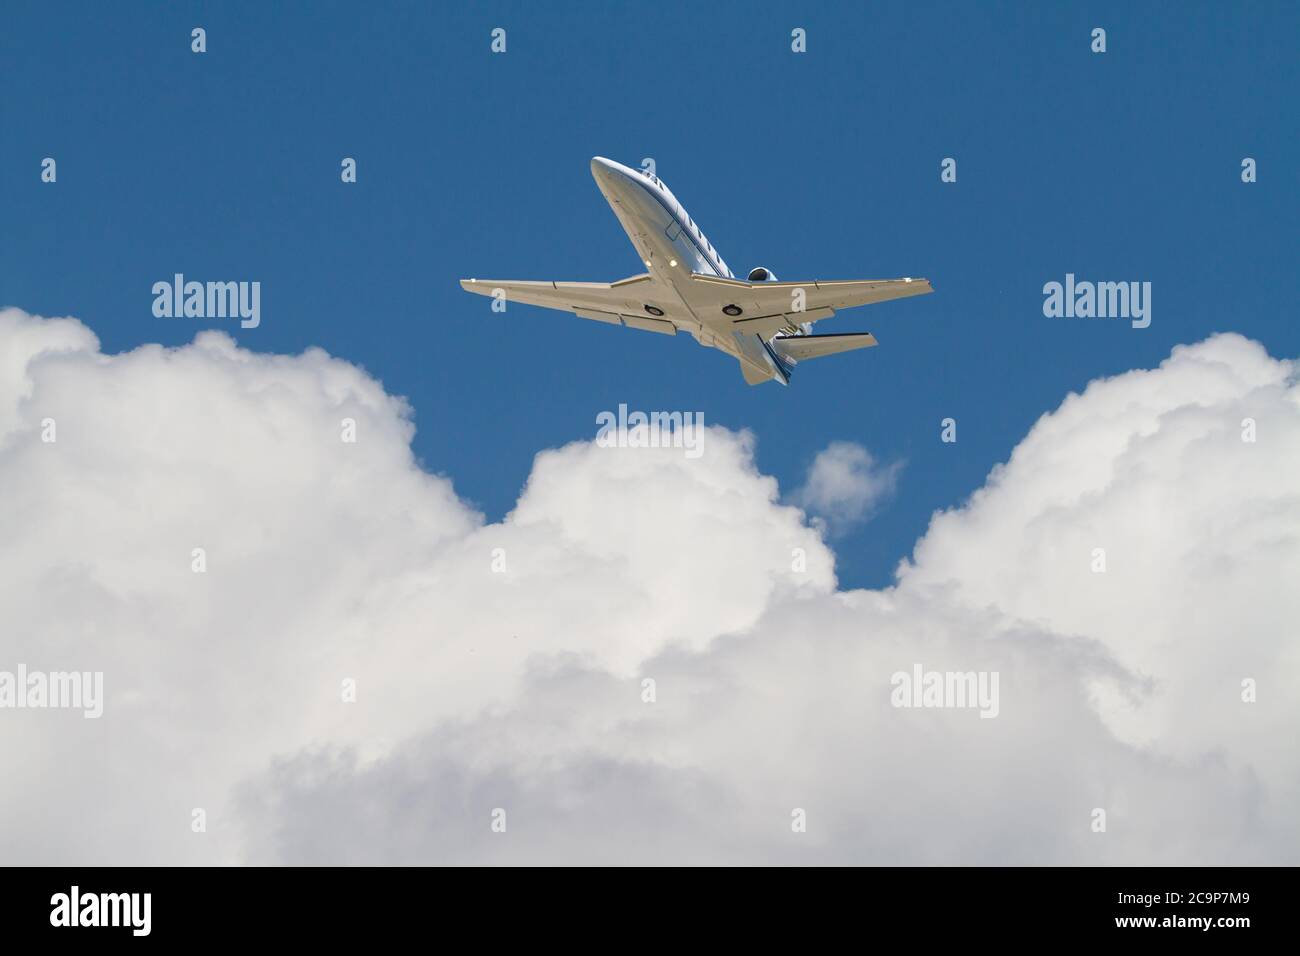 A corporate jet flies above puffy, white clouds in a deep blue sky. Stock Photo